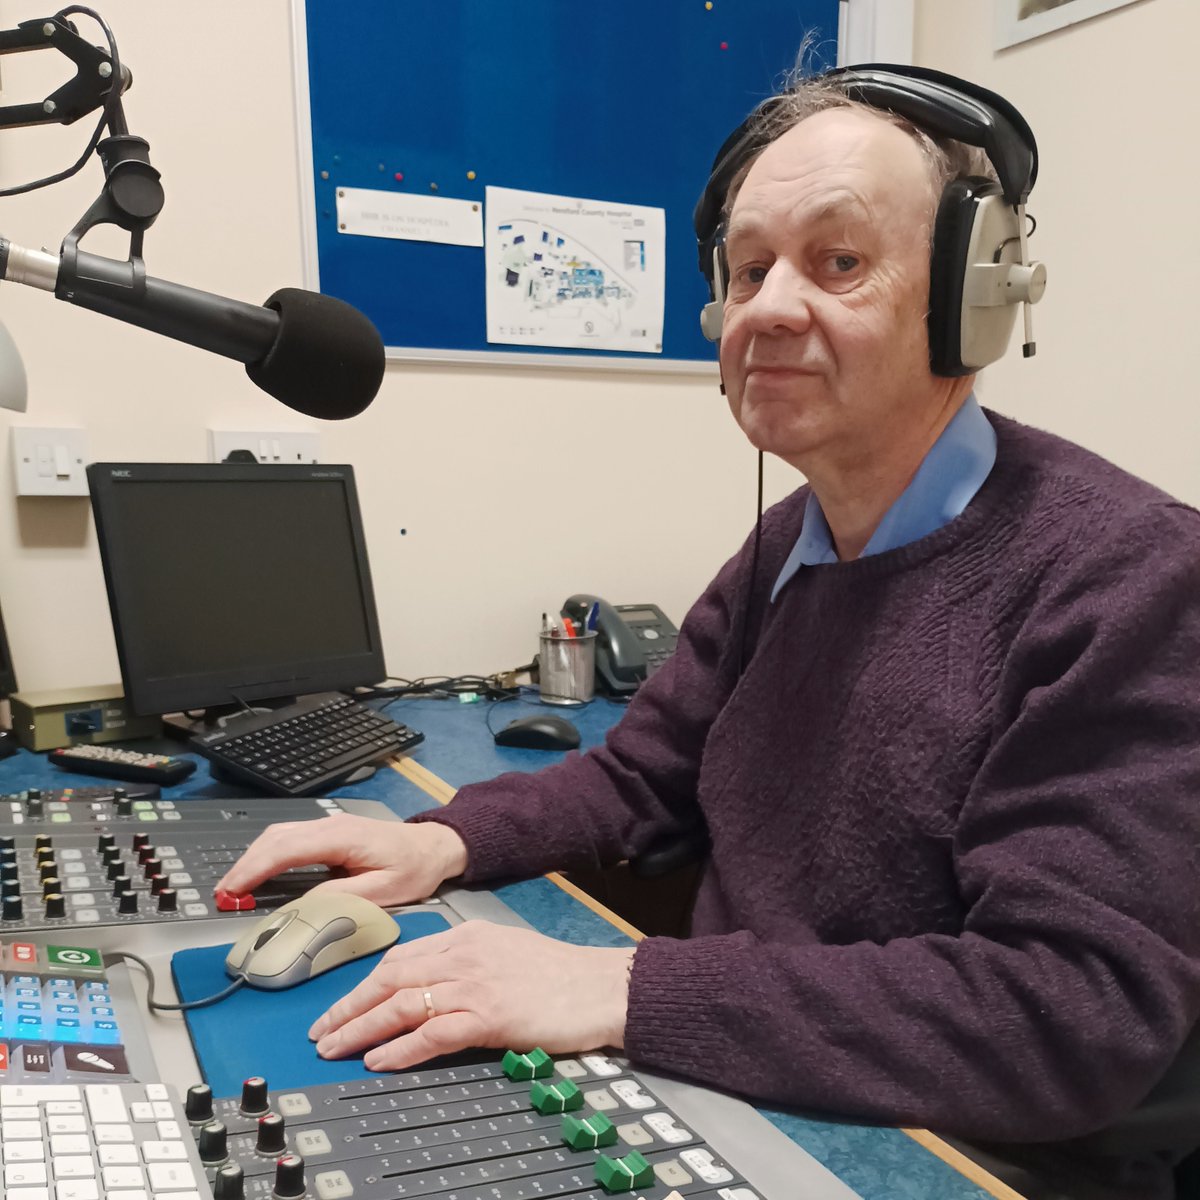 For 40 years, Andy has been presenting on hospital radio. Not only does it give meaning to his life, but Andy believes the comfort of radio is good for patients' wellbeing. Thank you, Andy, for your dedicated service. We appreciate you and the team. #amazingWVTvolunteers